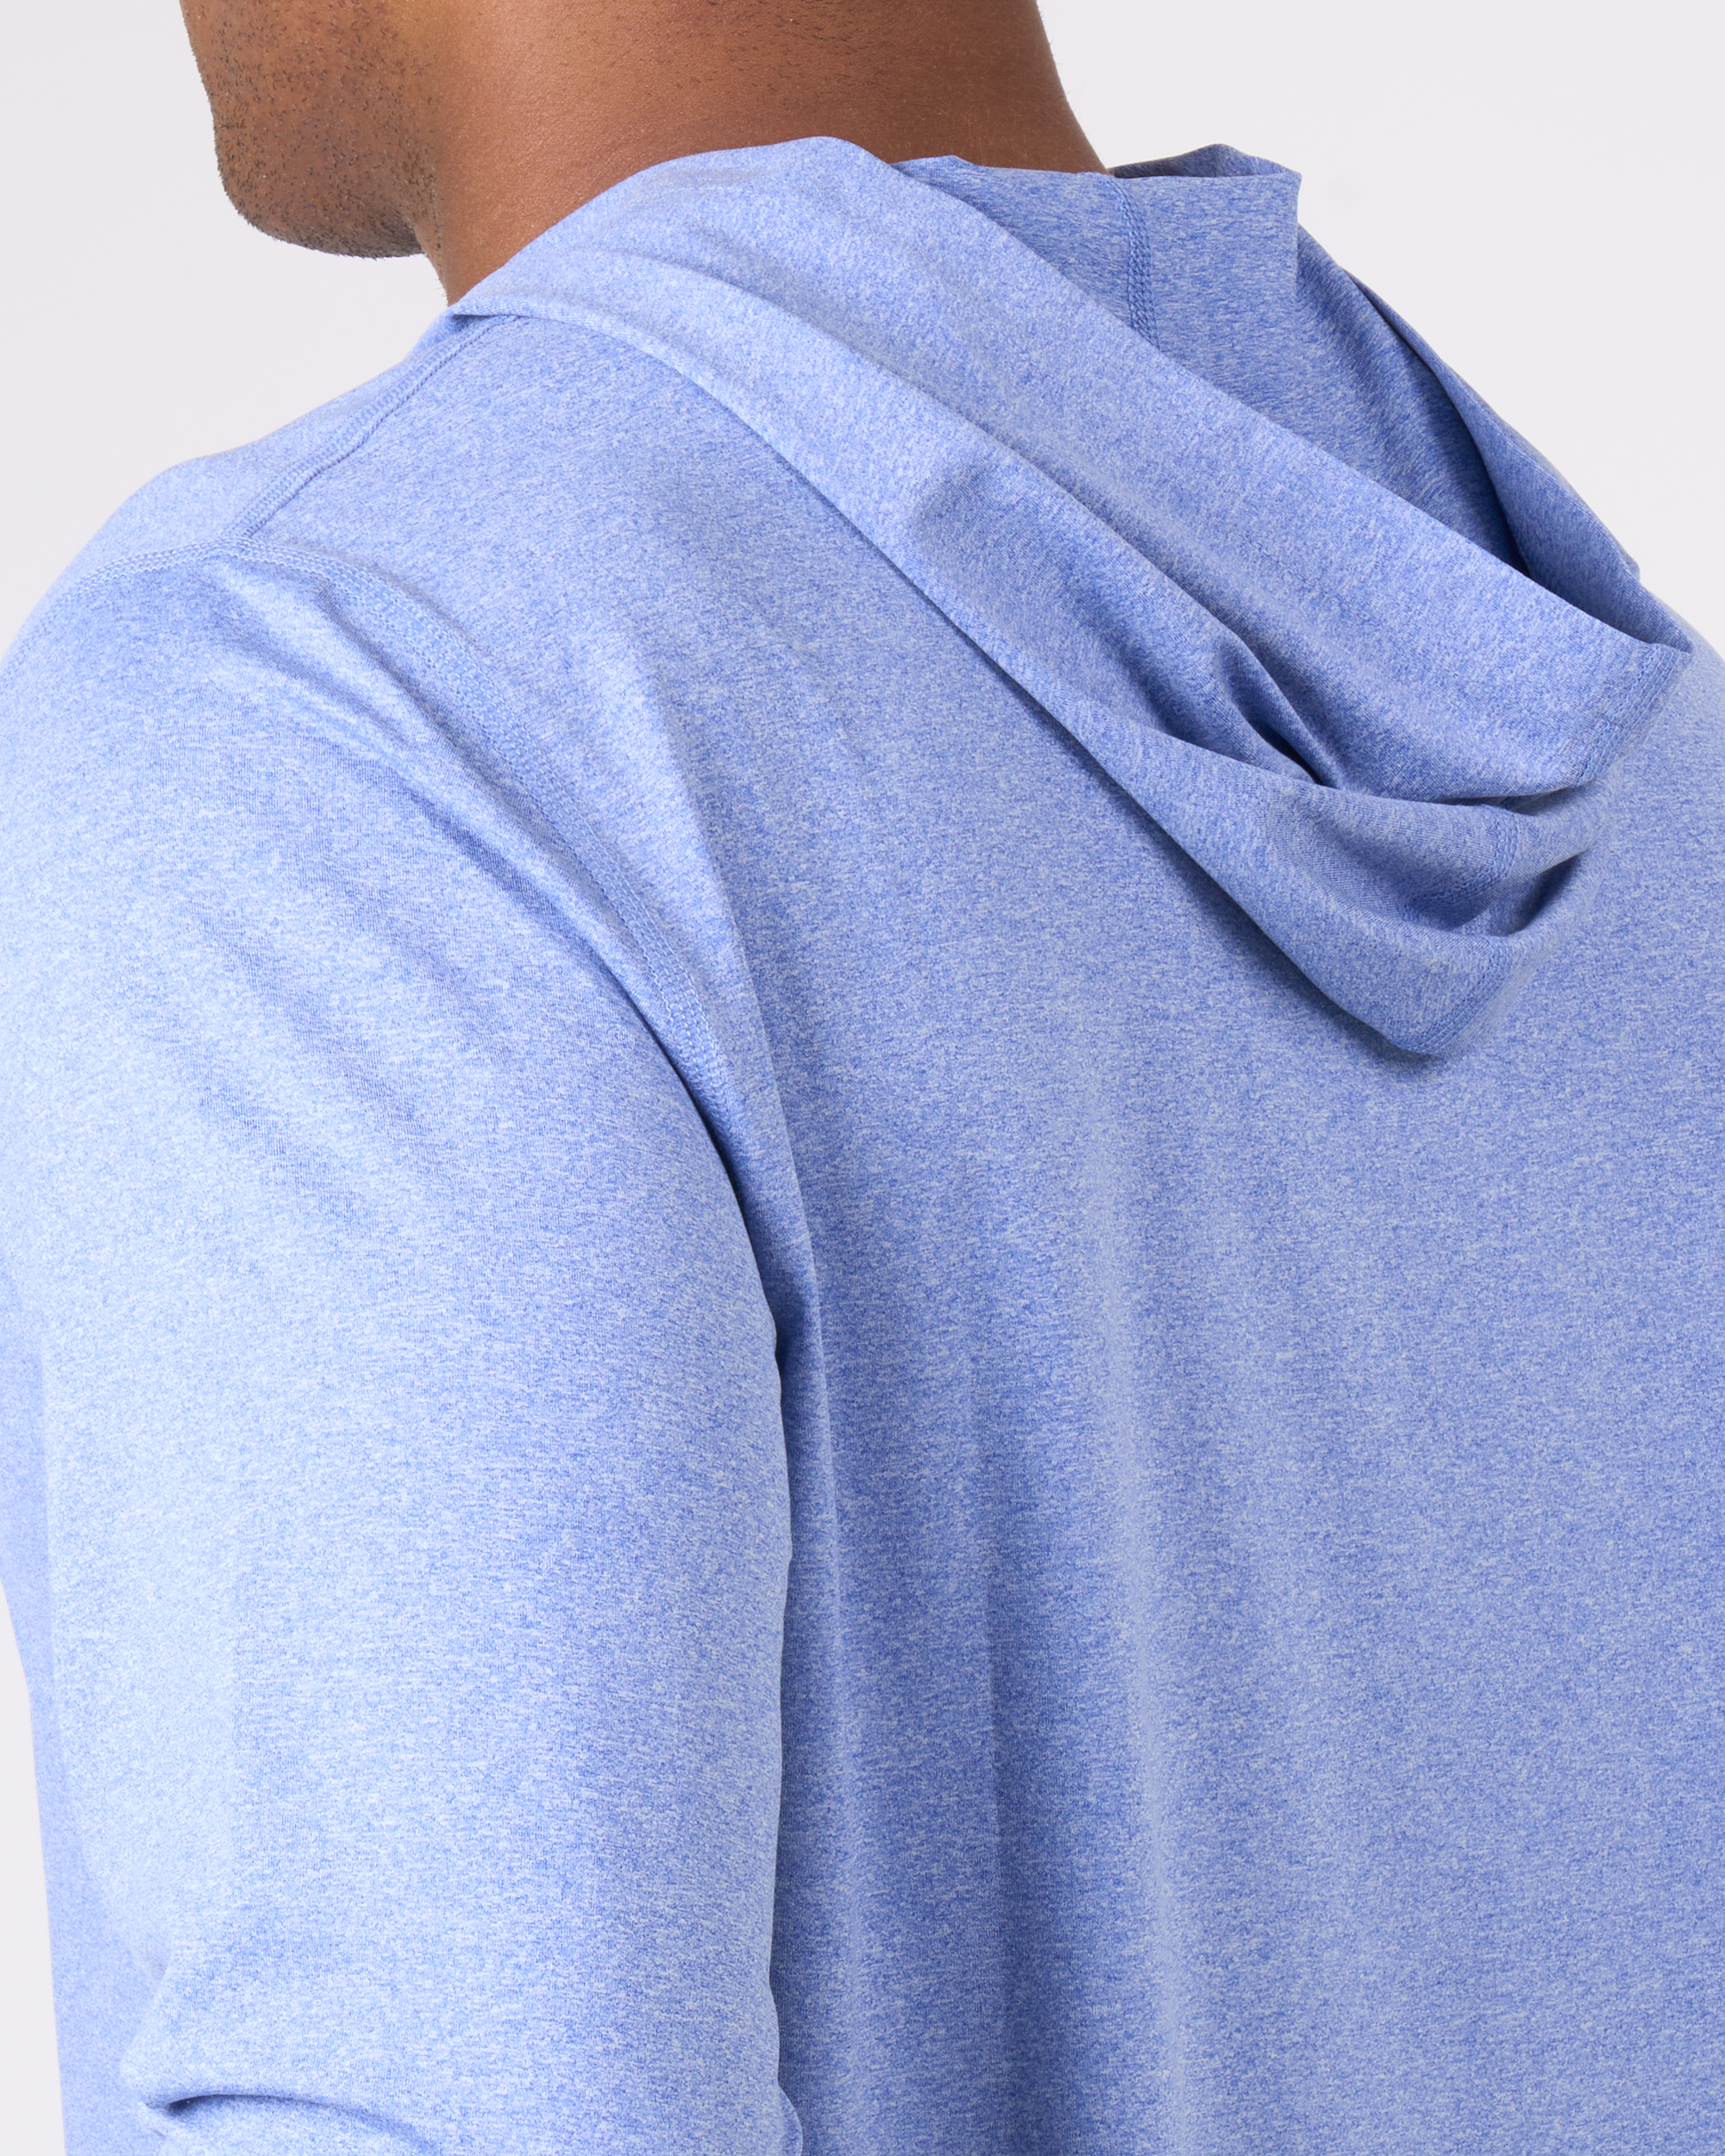 Foreign Rider Co Technical Fabric Surf Blue Long-Sleeve Hooded T-Shirt Shoulder Hood Detail